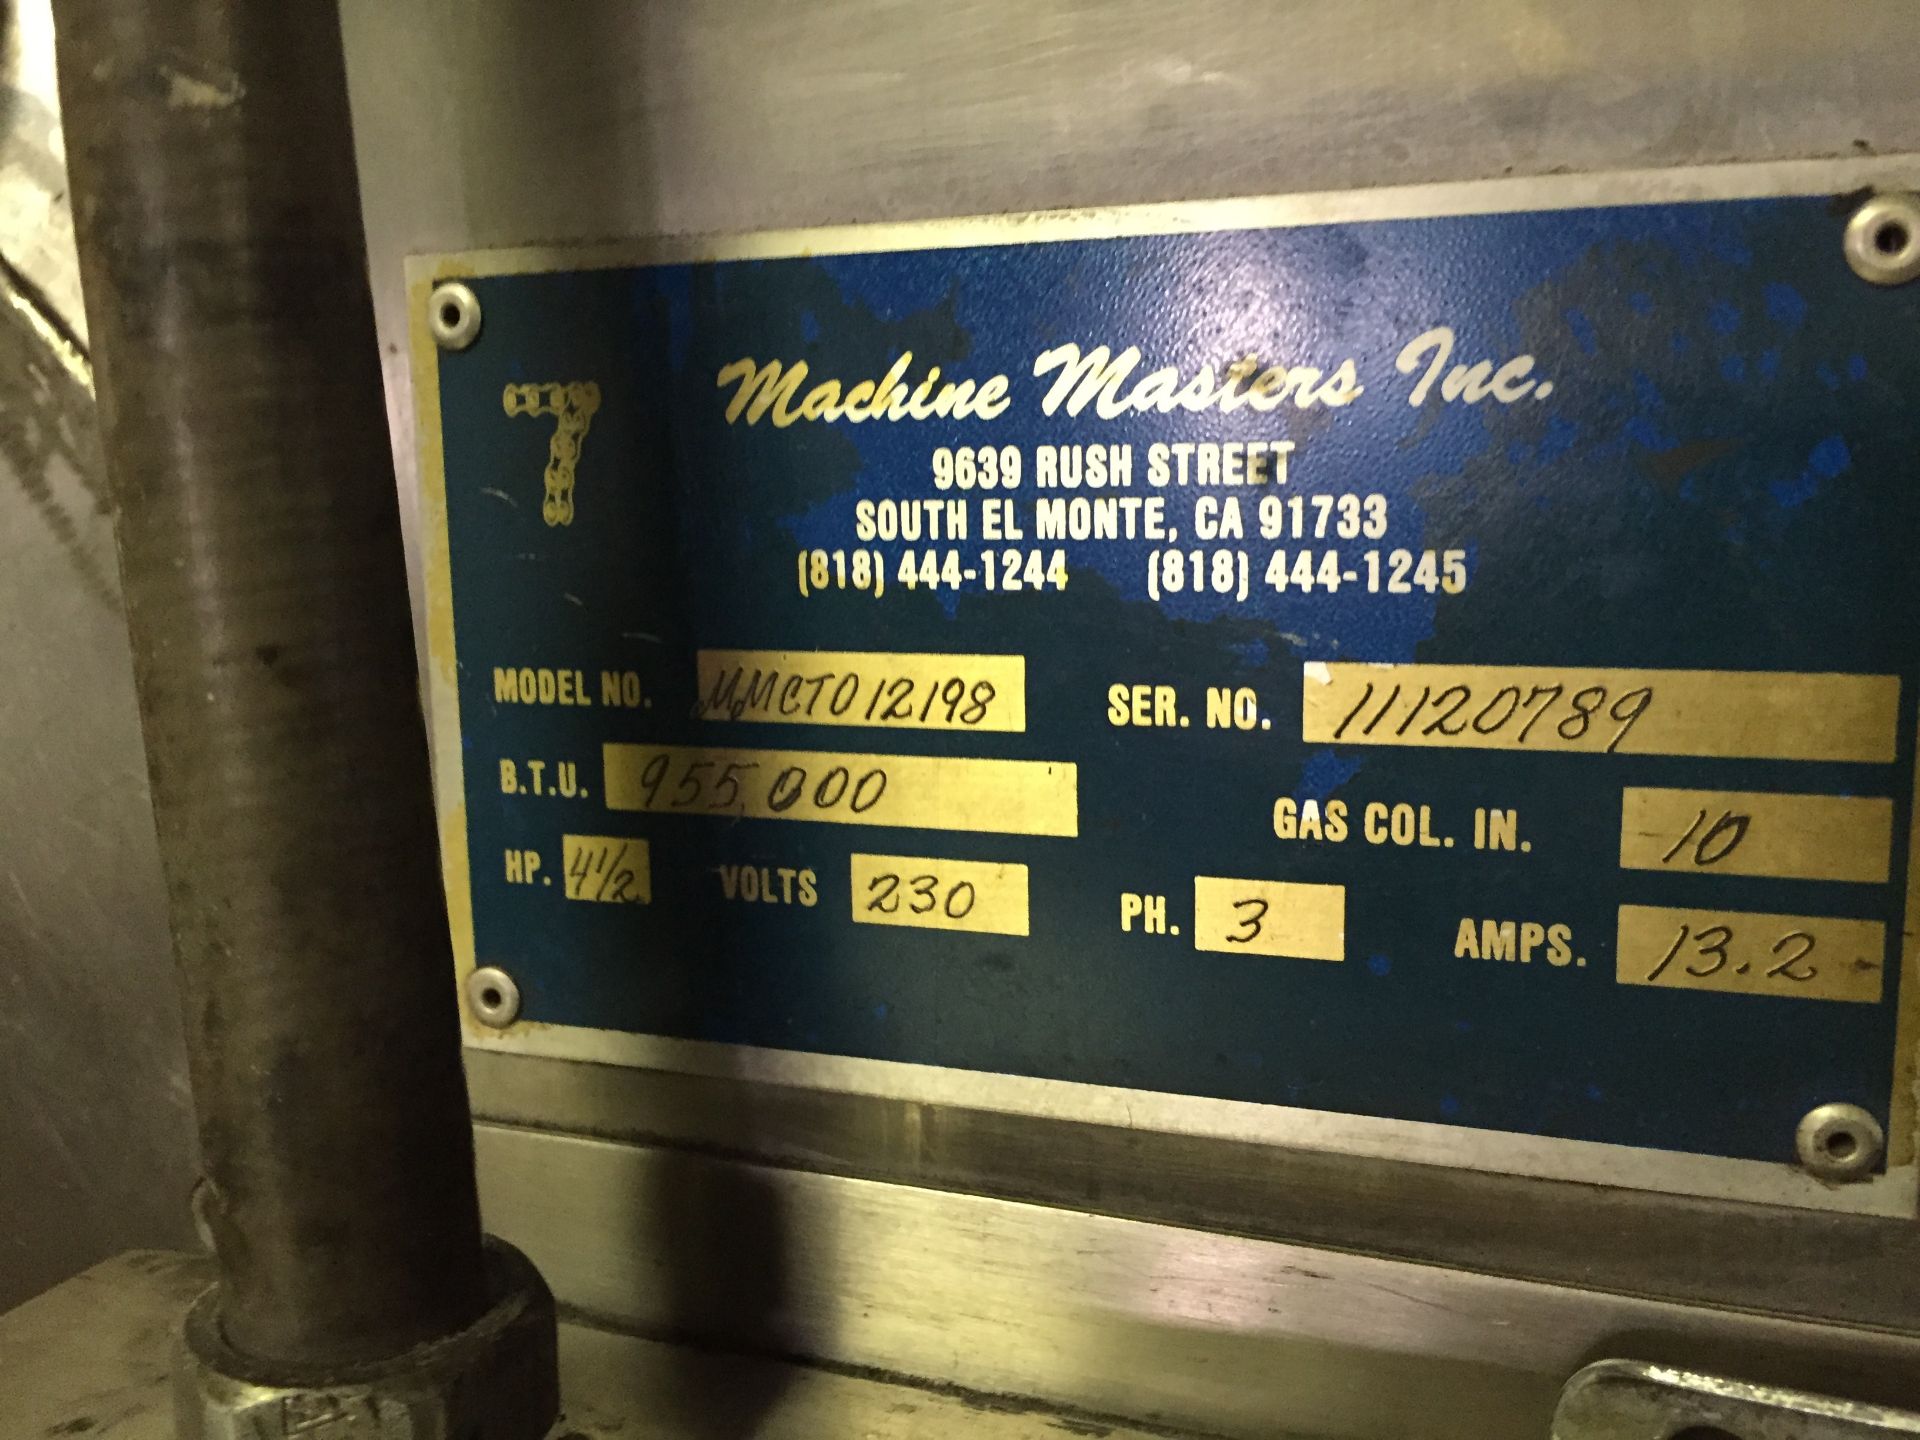 Machine Masters Corn Oven with Press Model #MMCT012198, Located in: St. Mary's, PA - Image 2 of 2